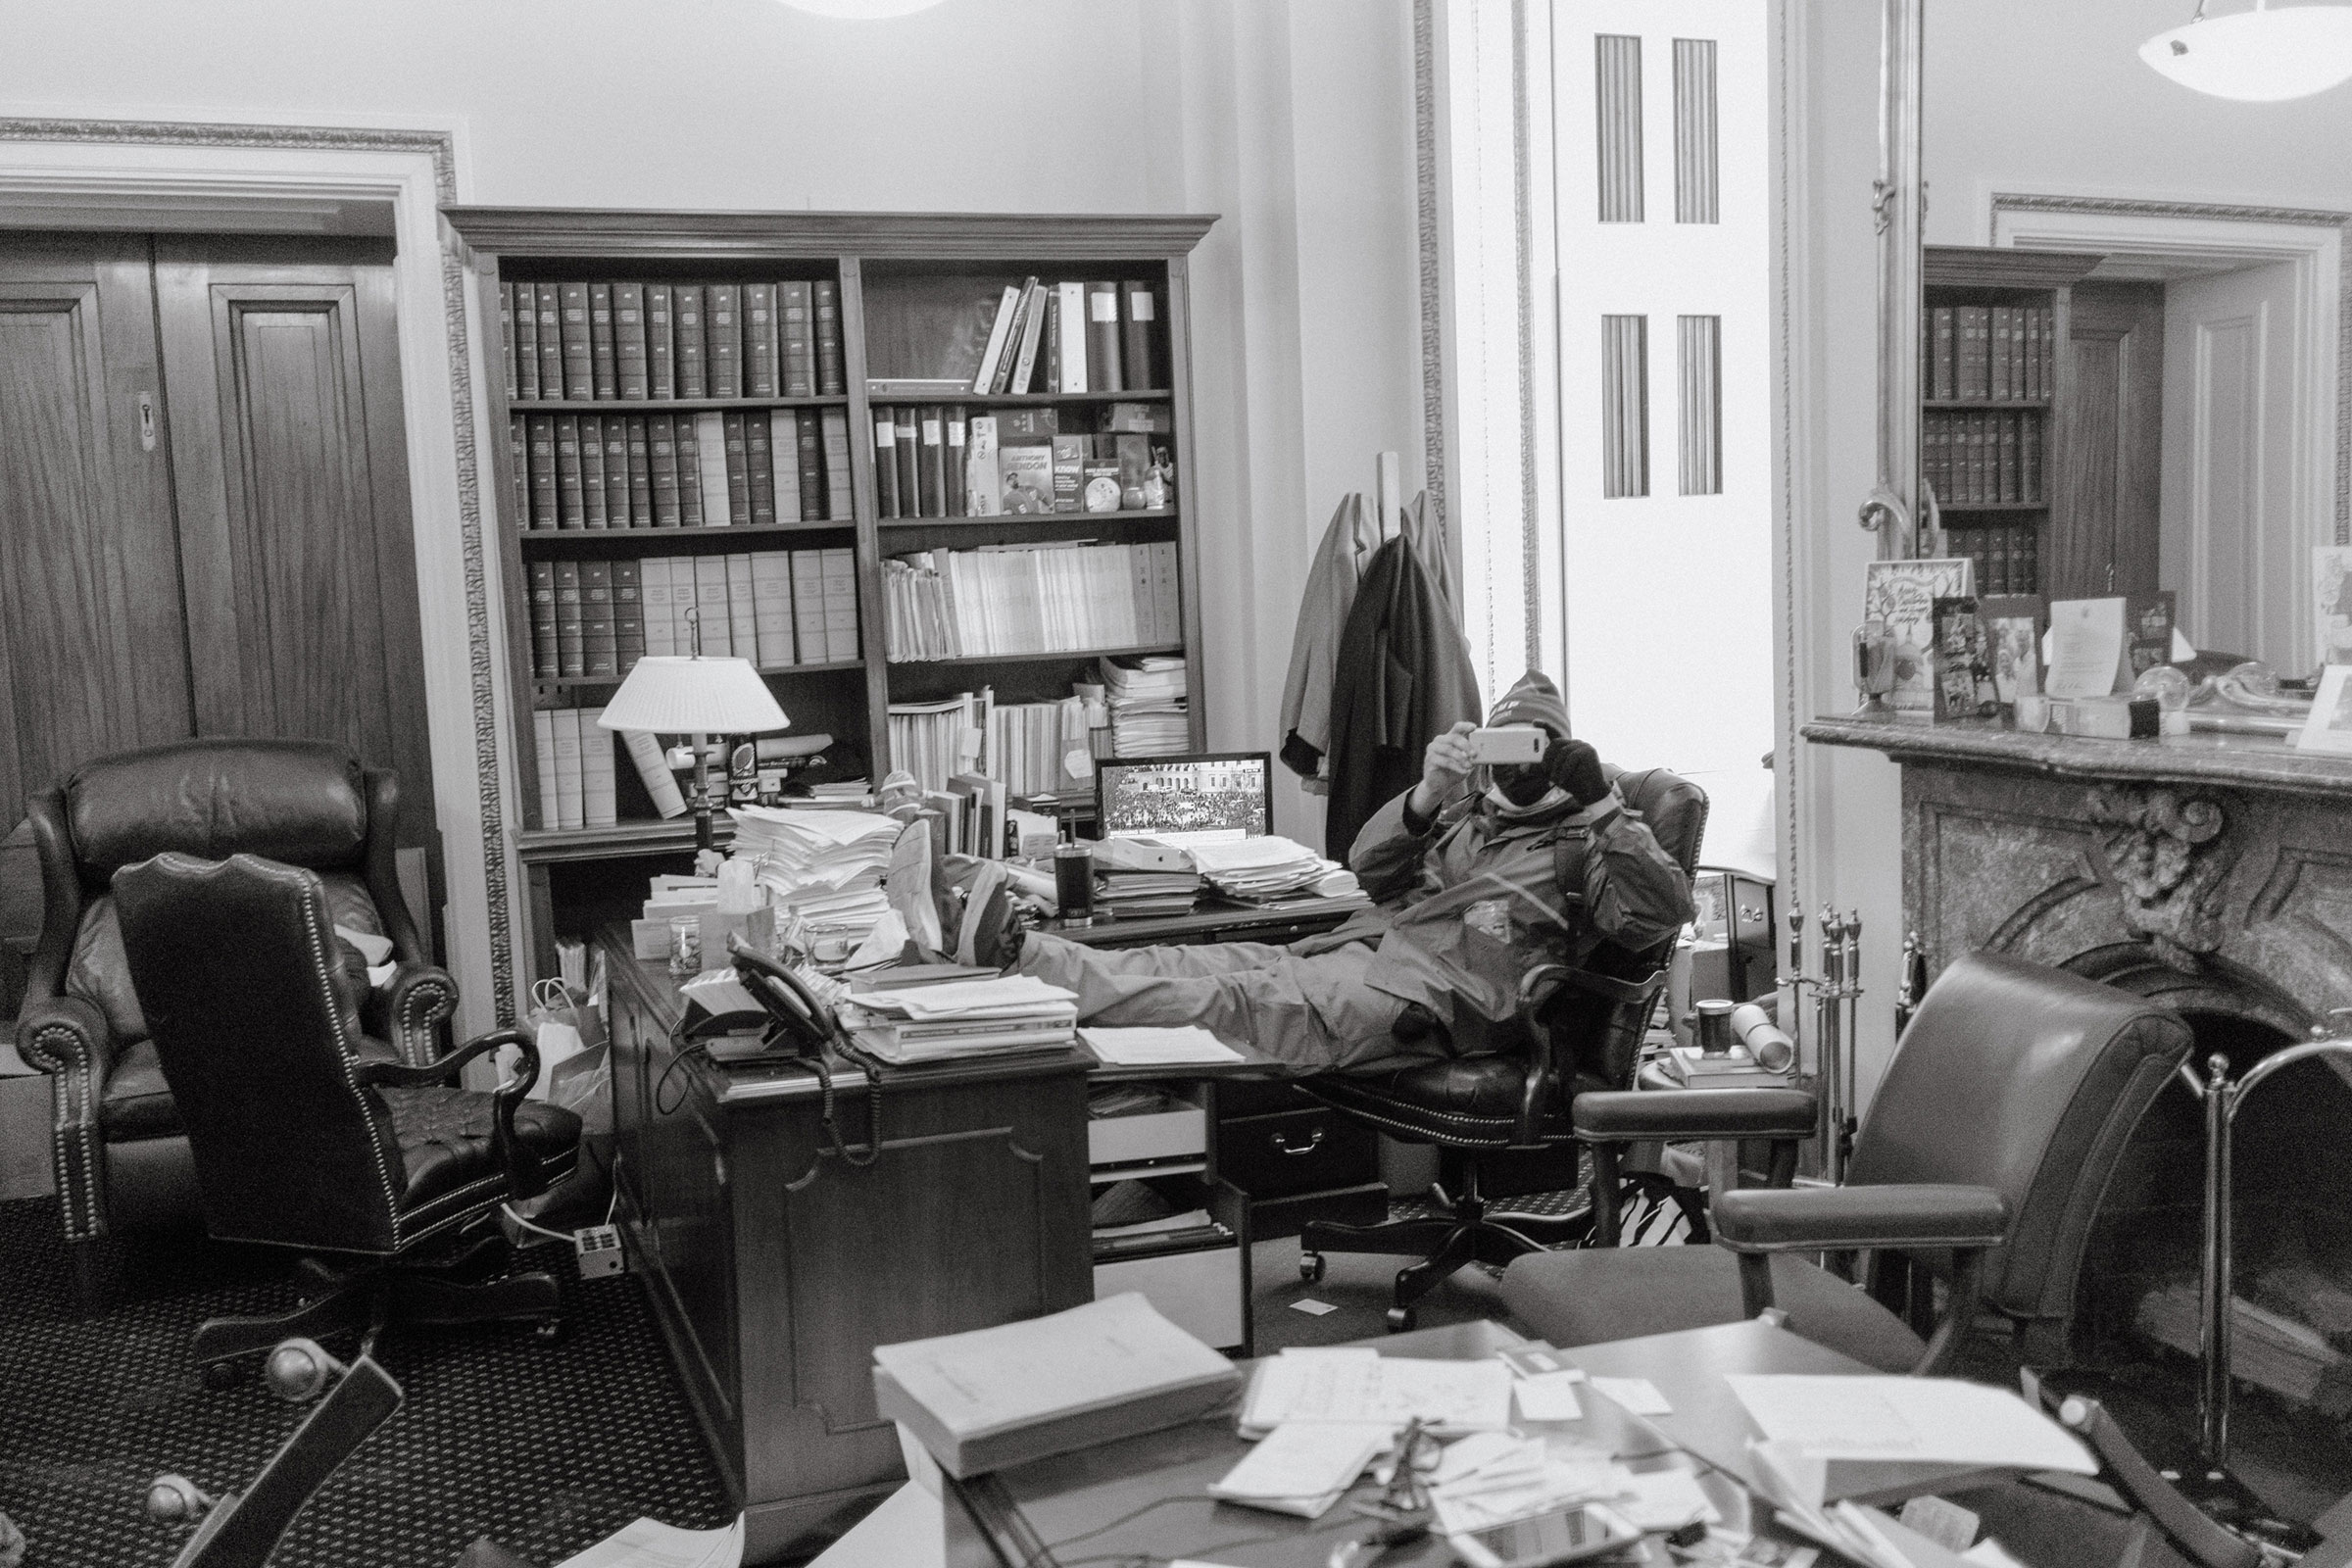 A pro-Trump rioter sits with their feet up on a desk inside an office in the Capitol. (Christopher Lee for TIME)